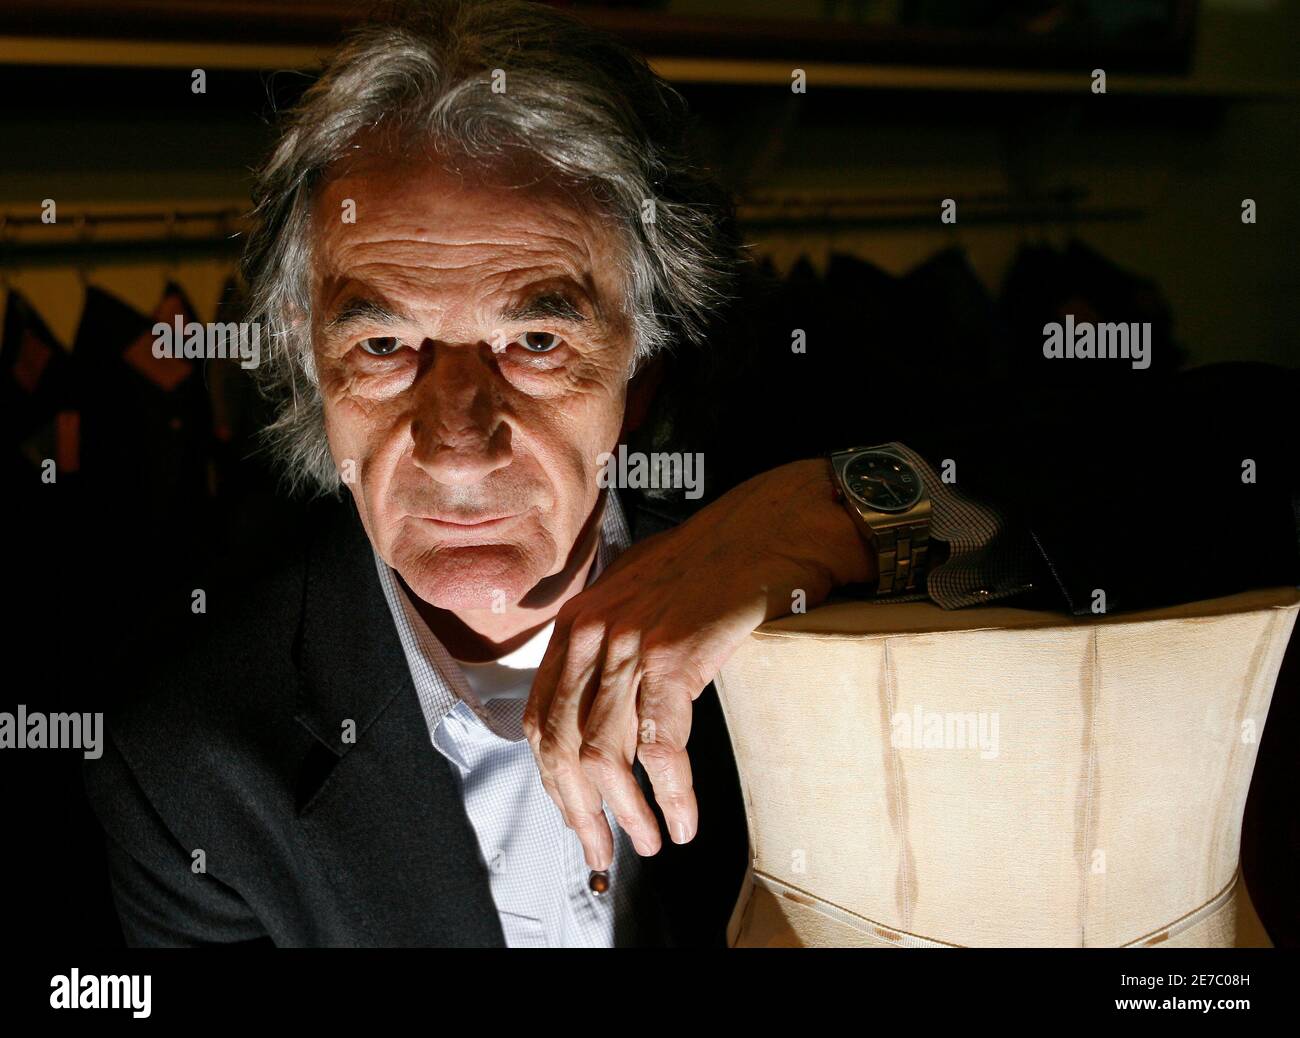 British designer Paul Smith poses for a photo in his office in central  London February 17, 2009. As the world falls deeper into a recession,  British fashion powerhouse Sir Paul Smith talked